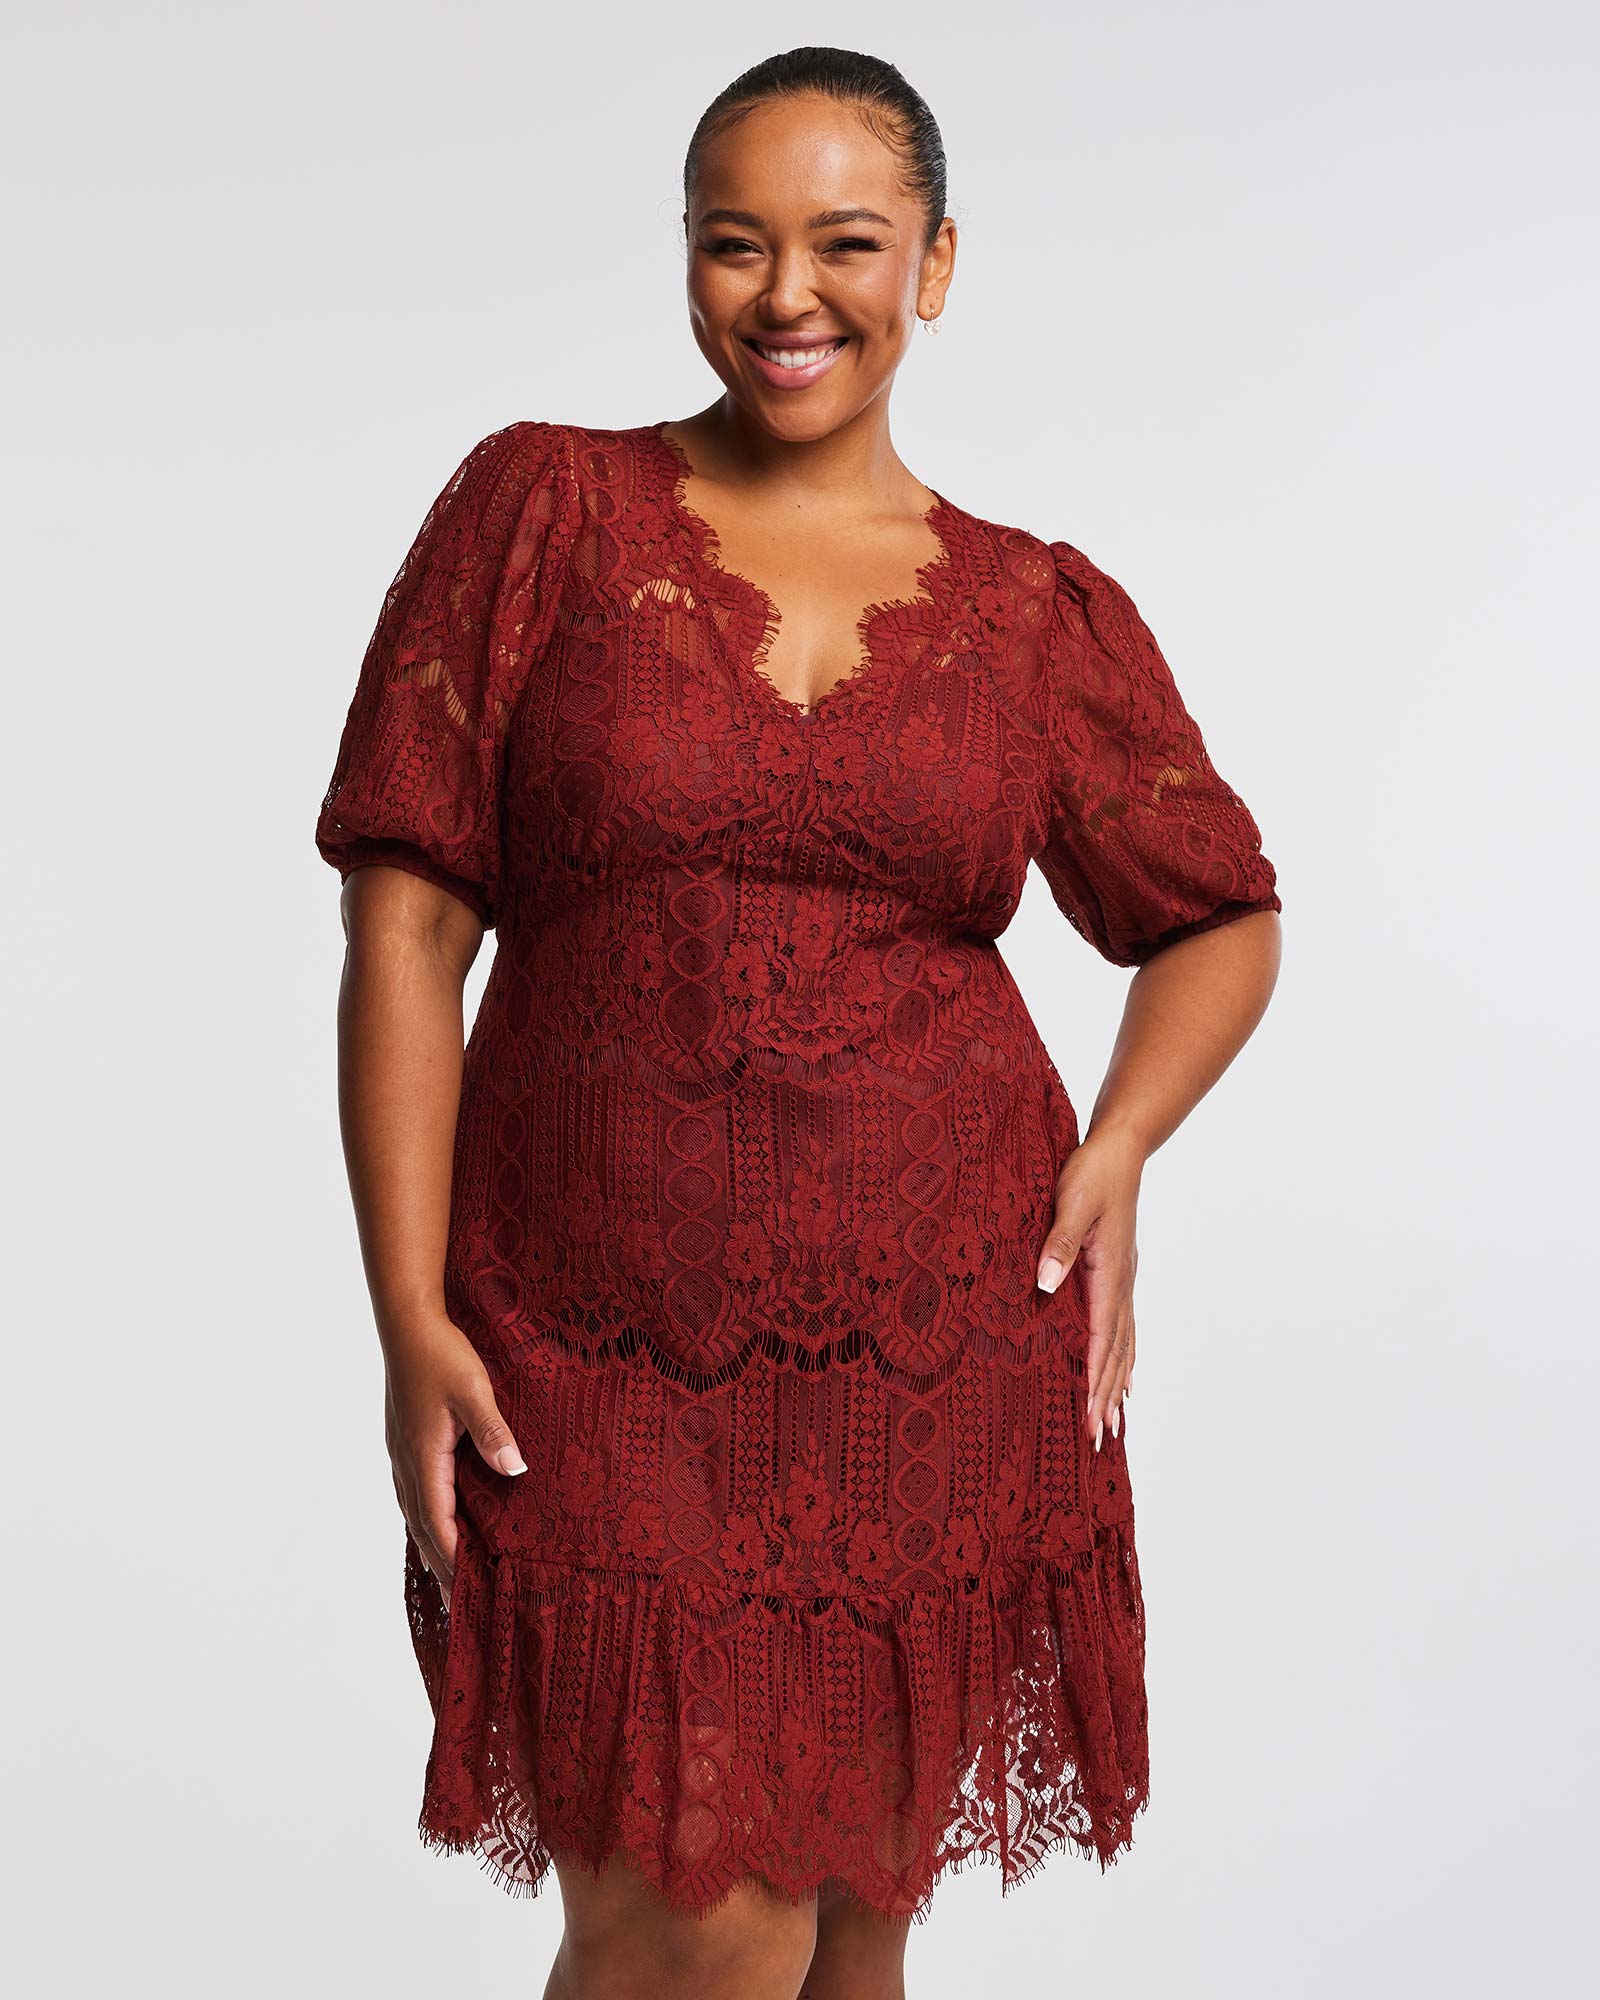 A plus-sized woman exuding elegance in a burgundy lace Liana Ginger Lace Mini Dress.